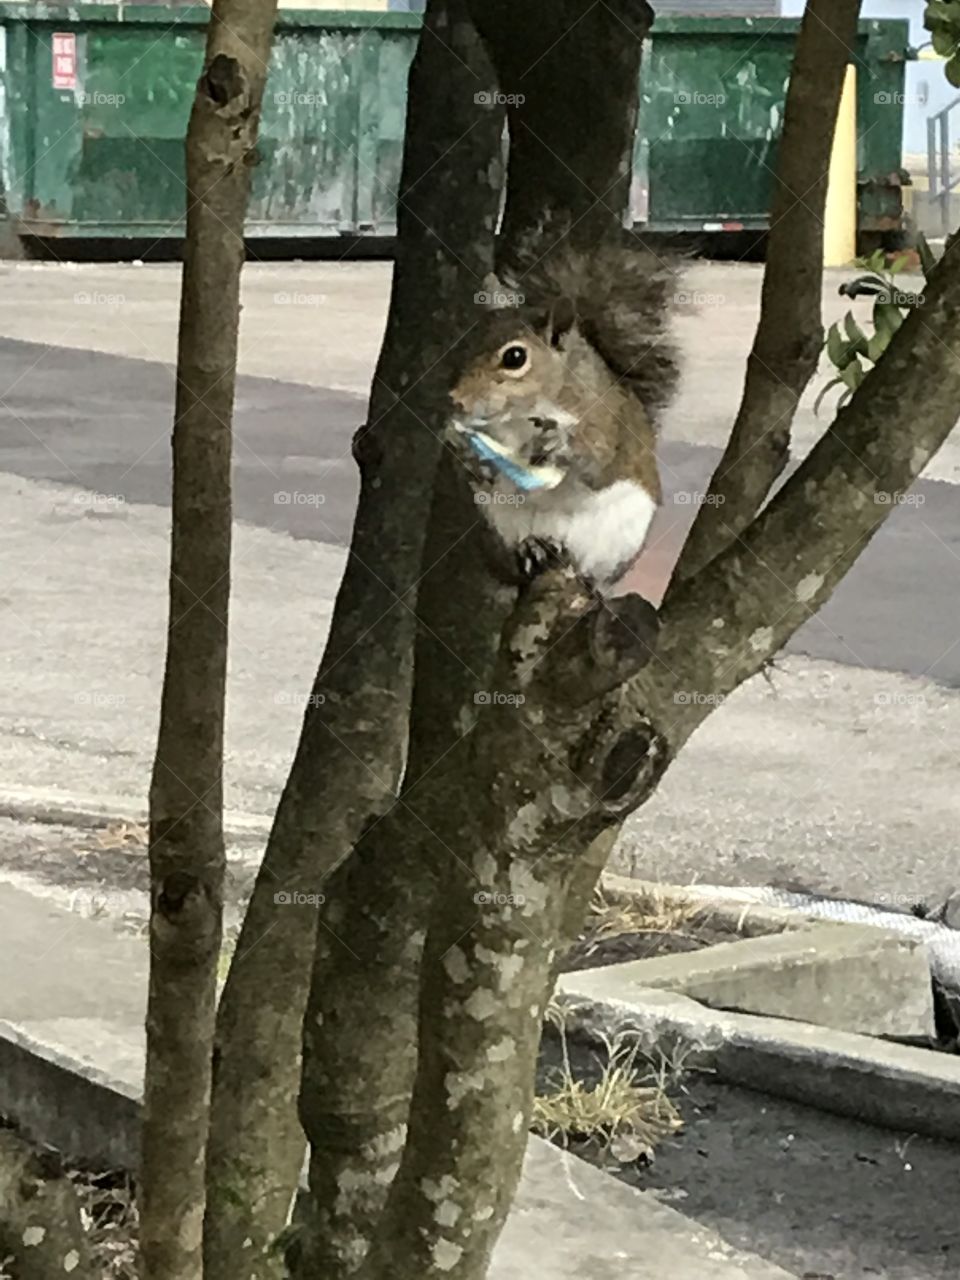 Squirrels love to pick up and eat random things off the ground, like this water bottle wrapper